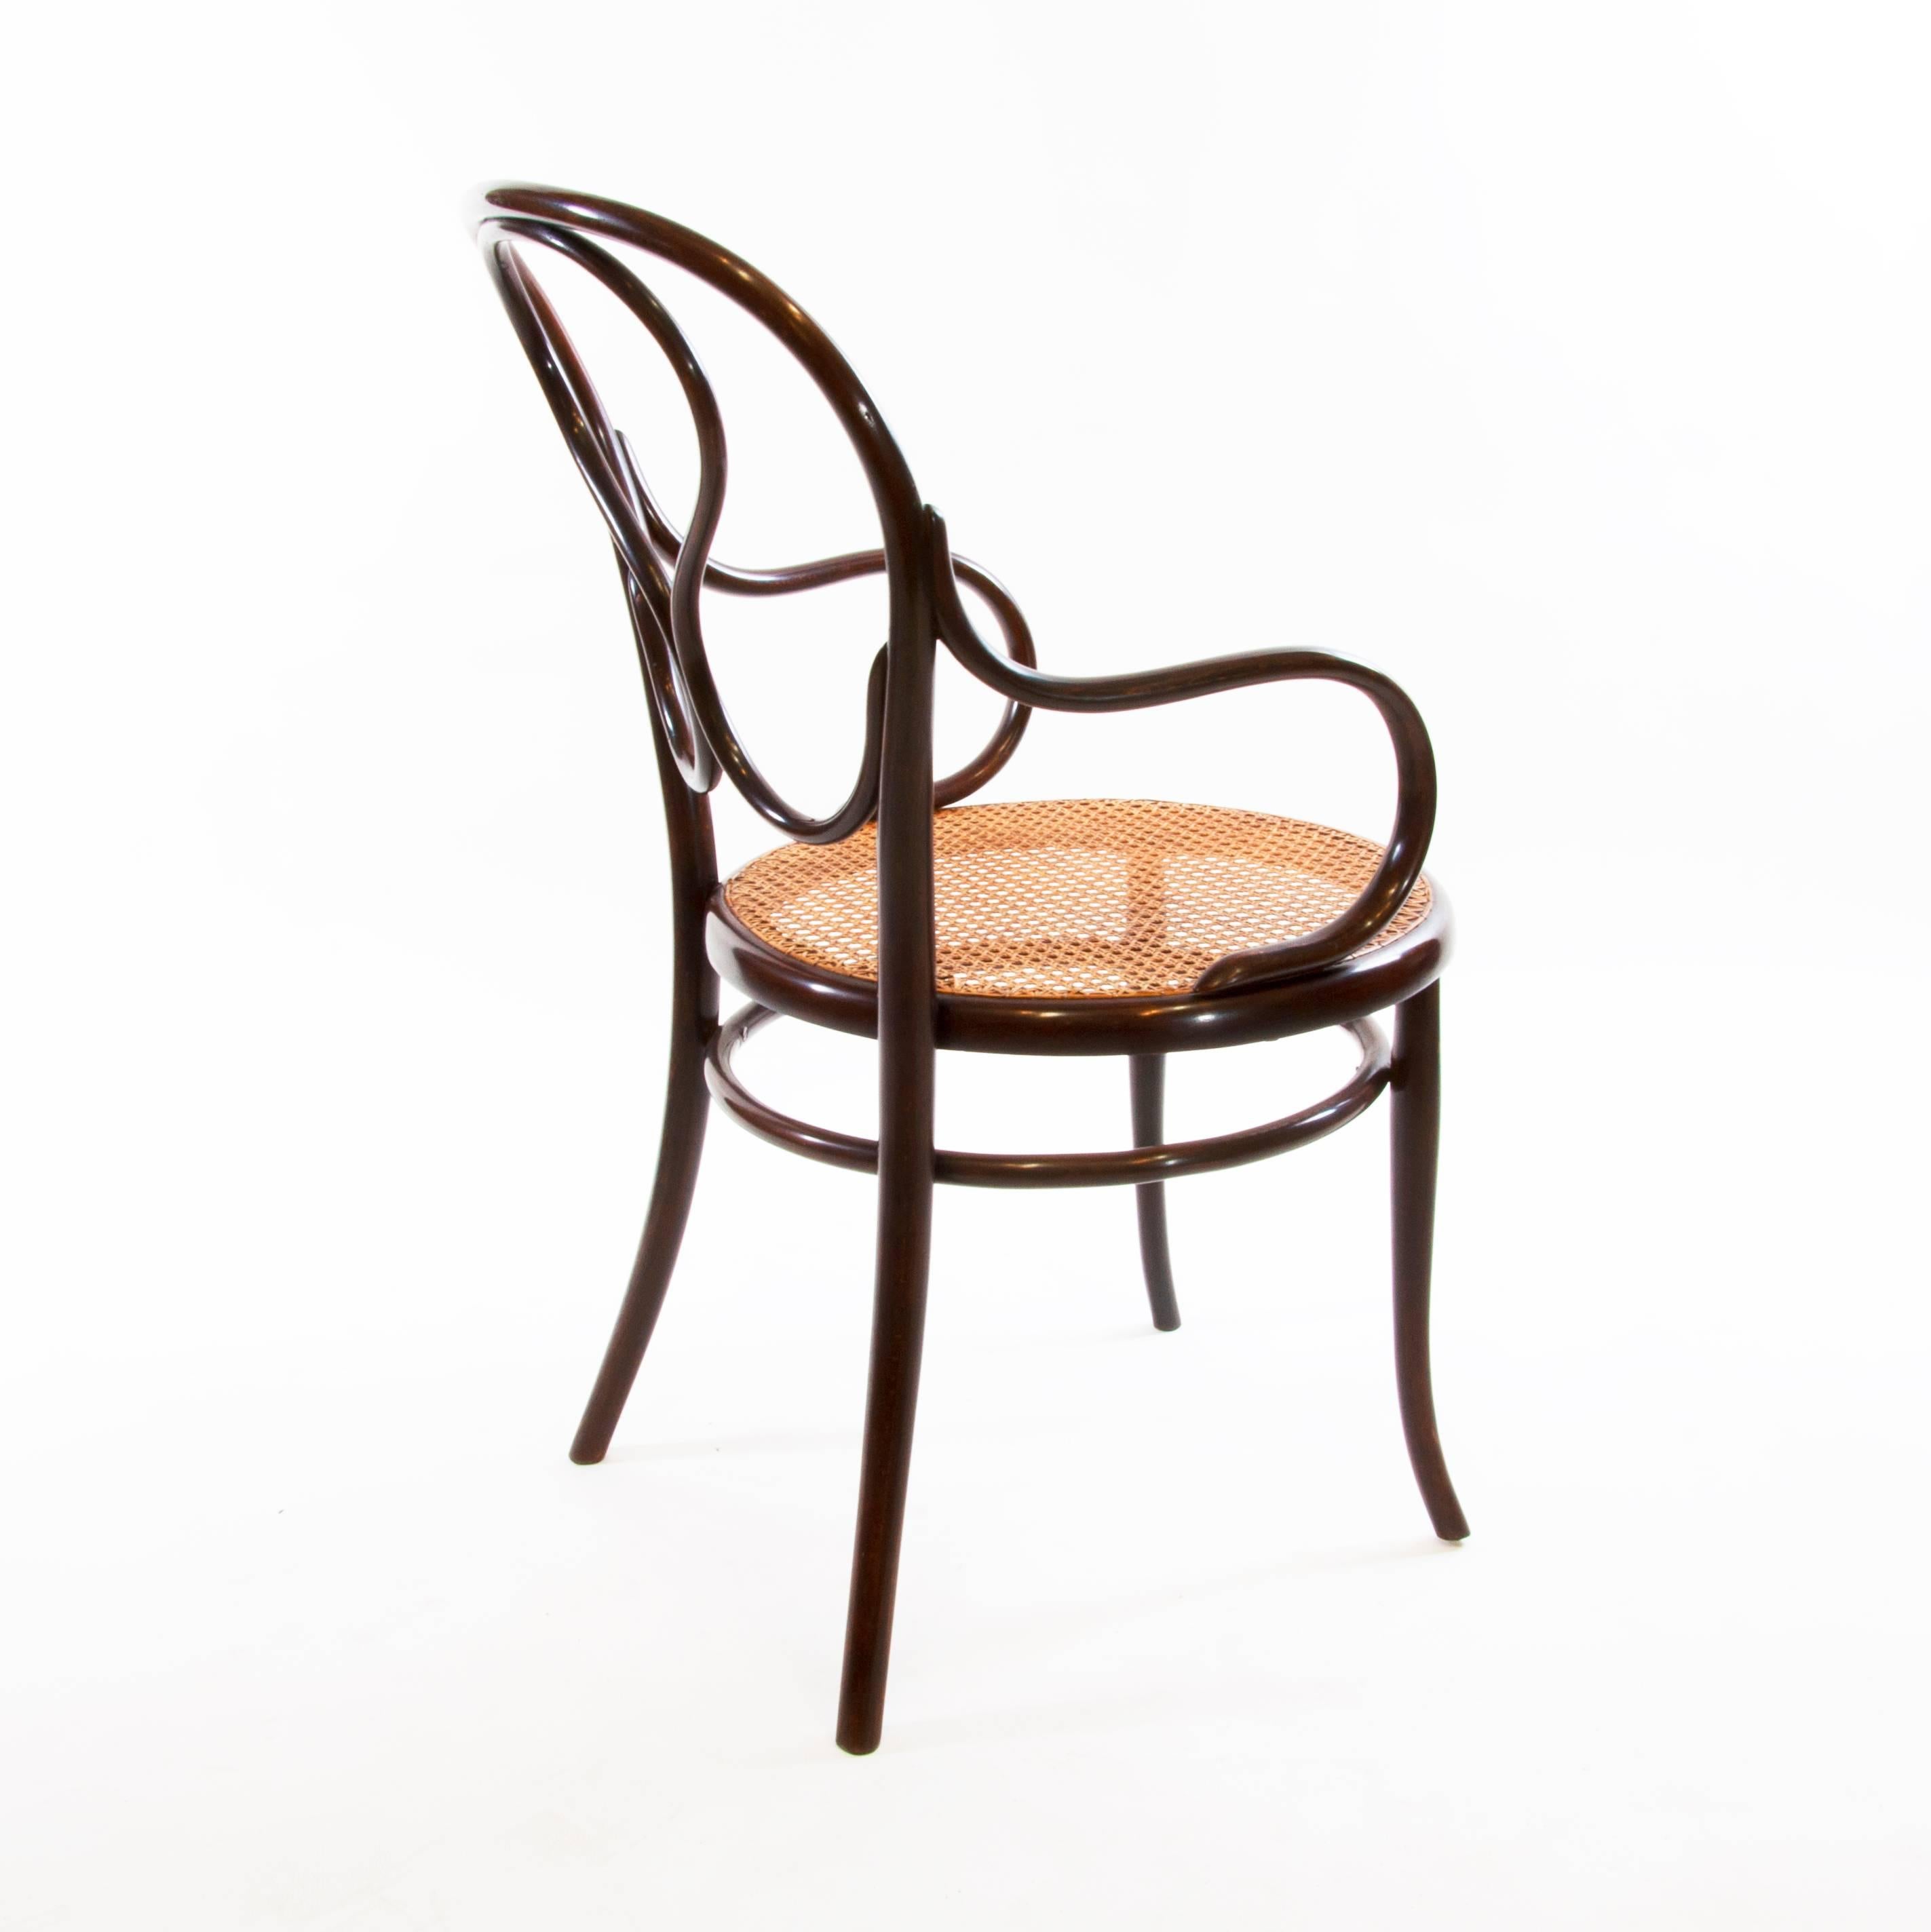 Stained Antique Thonet Bentwood Armchair Fauteuil No. 20, circa 1900 For Sale